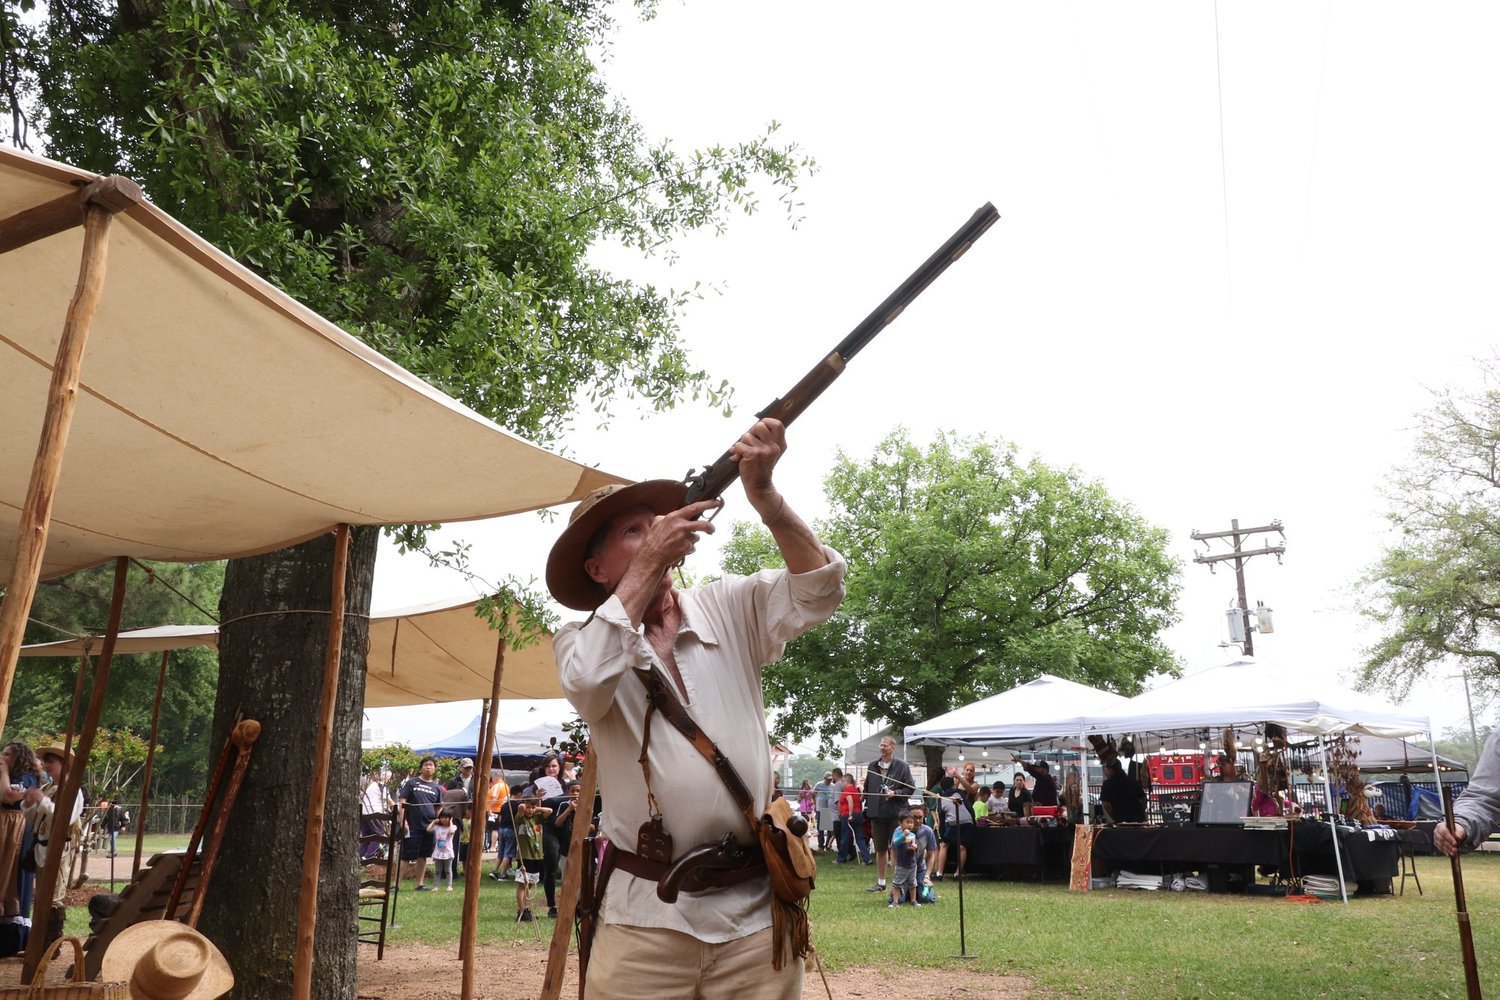 Katy residents can get out of the house this weekend and enjoy a fun history lesson at the 36th Annual Katy Folk Life Festival.